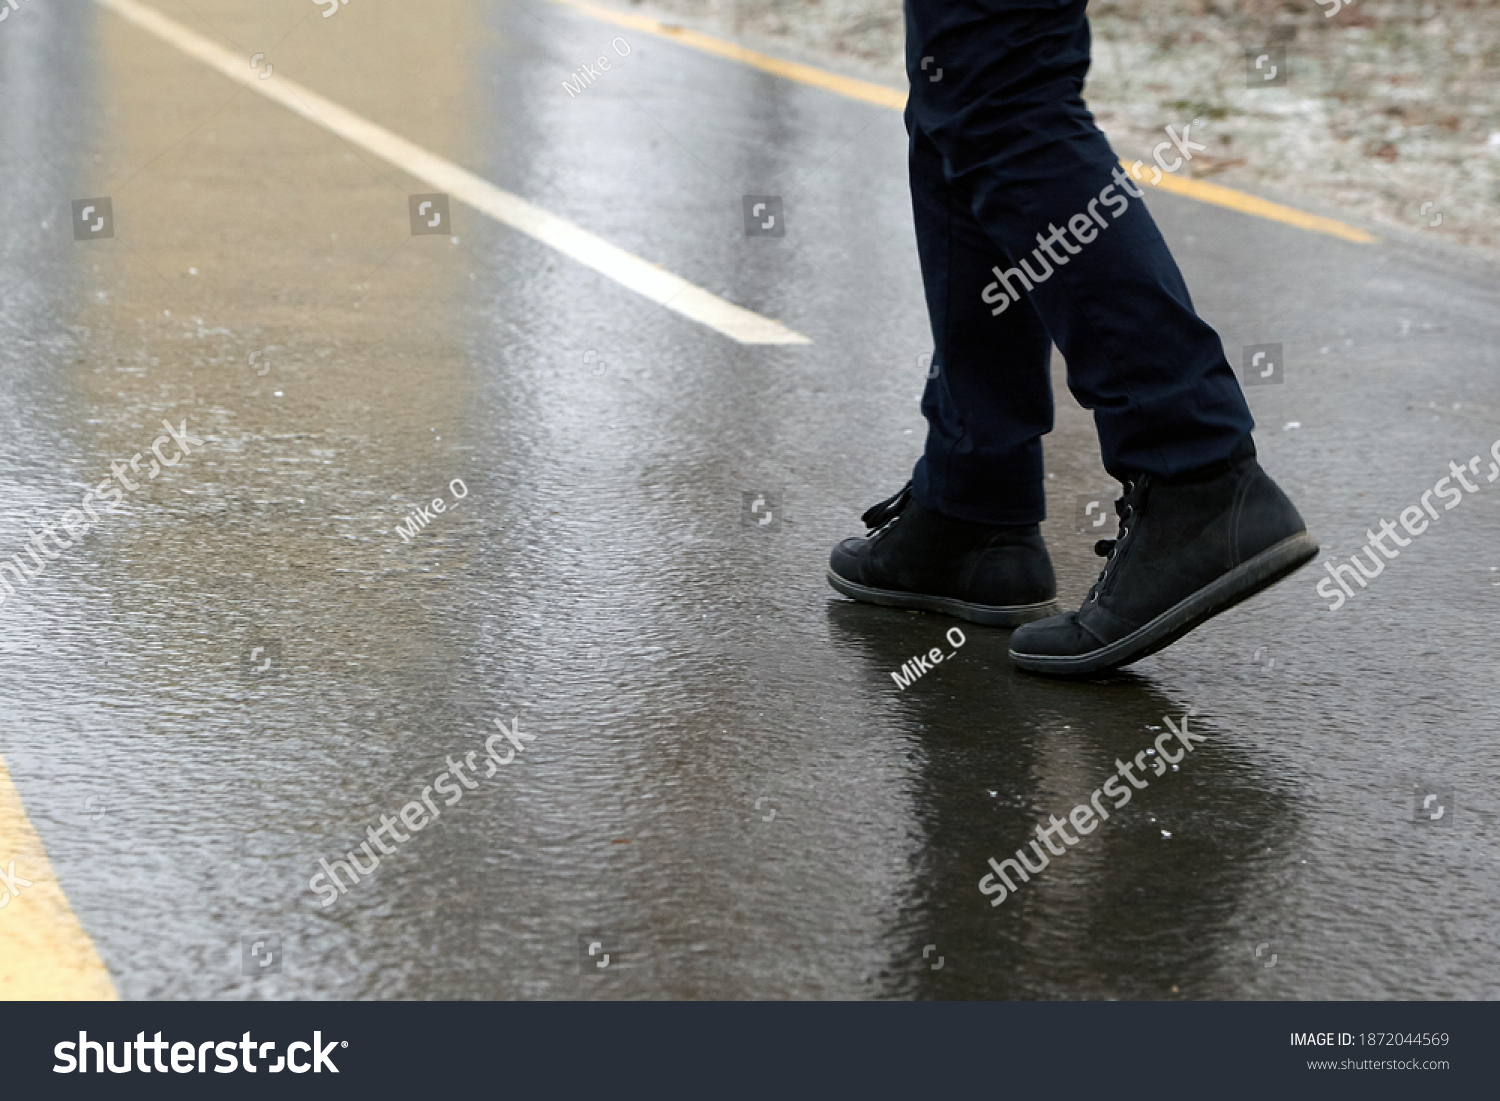 Ice crusted ground, a man walking on a slippery street, icy sidewalk, winter weater #1872044569